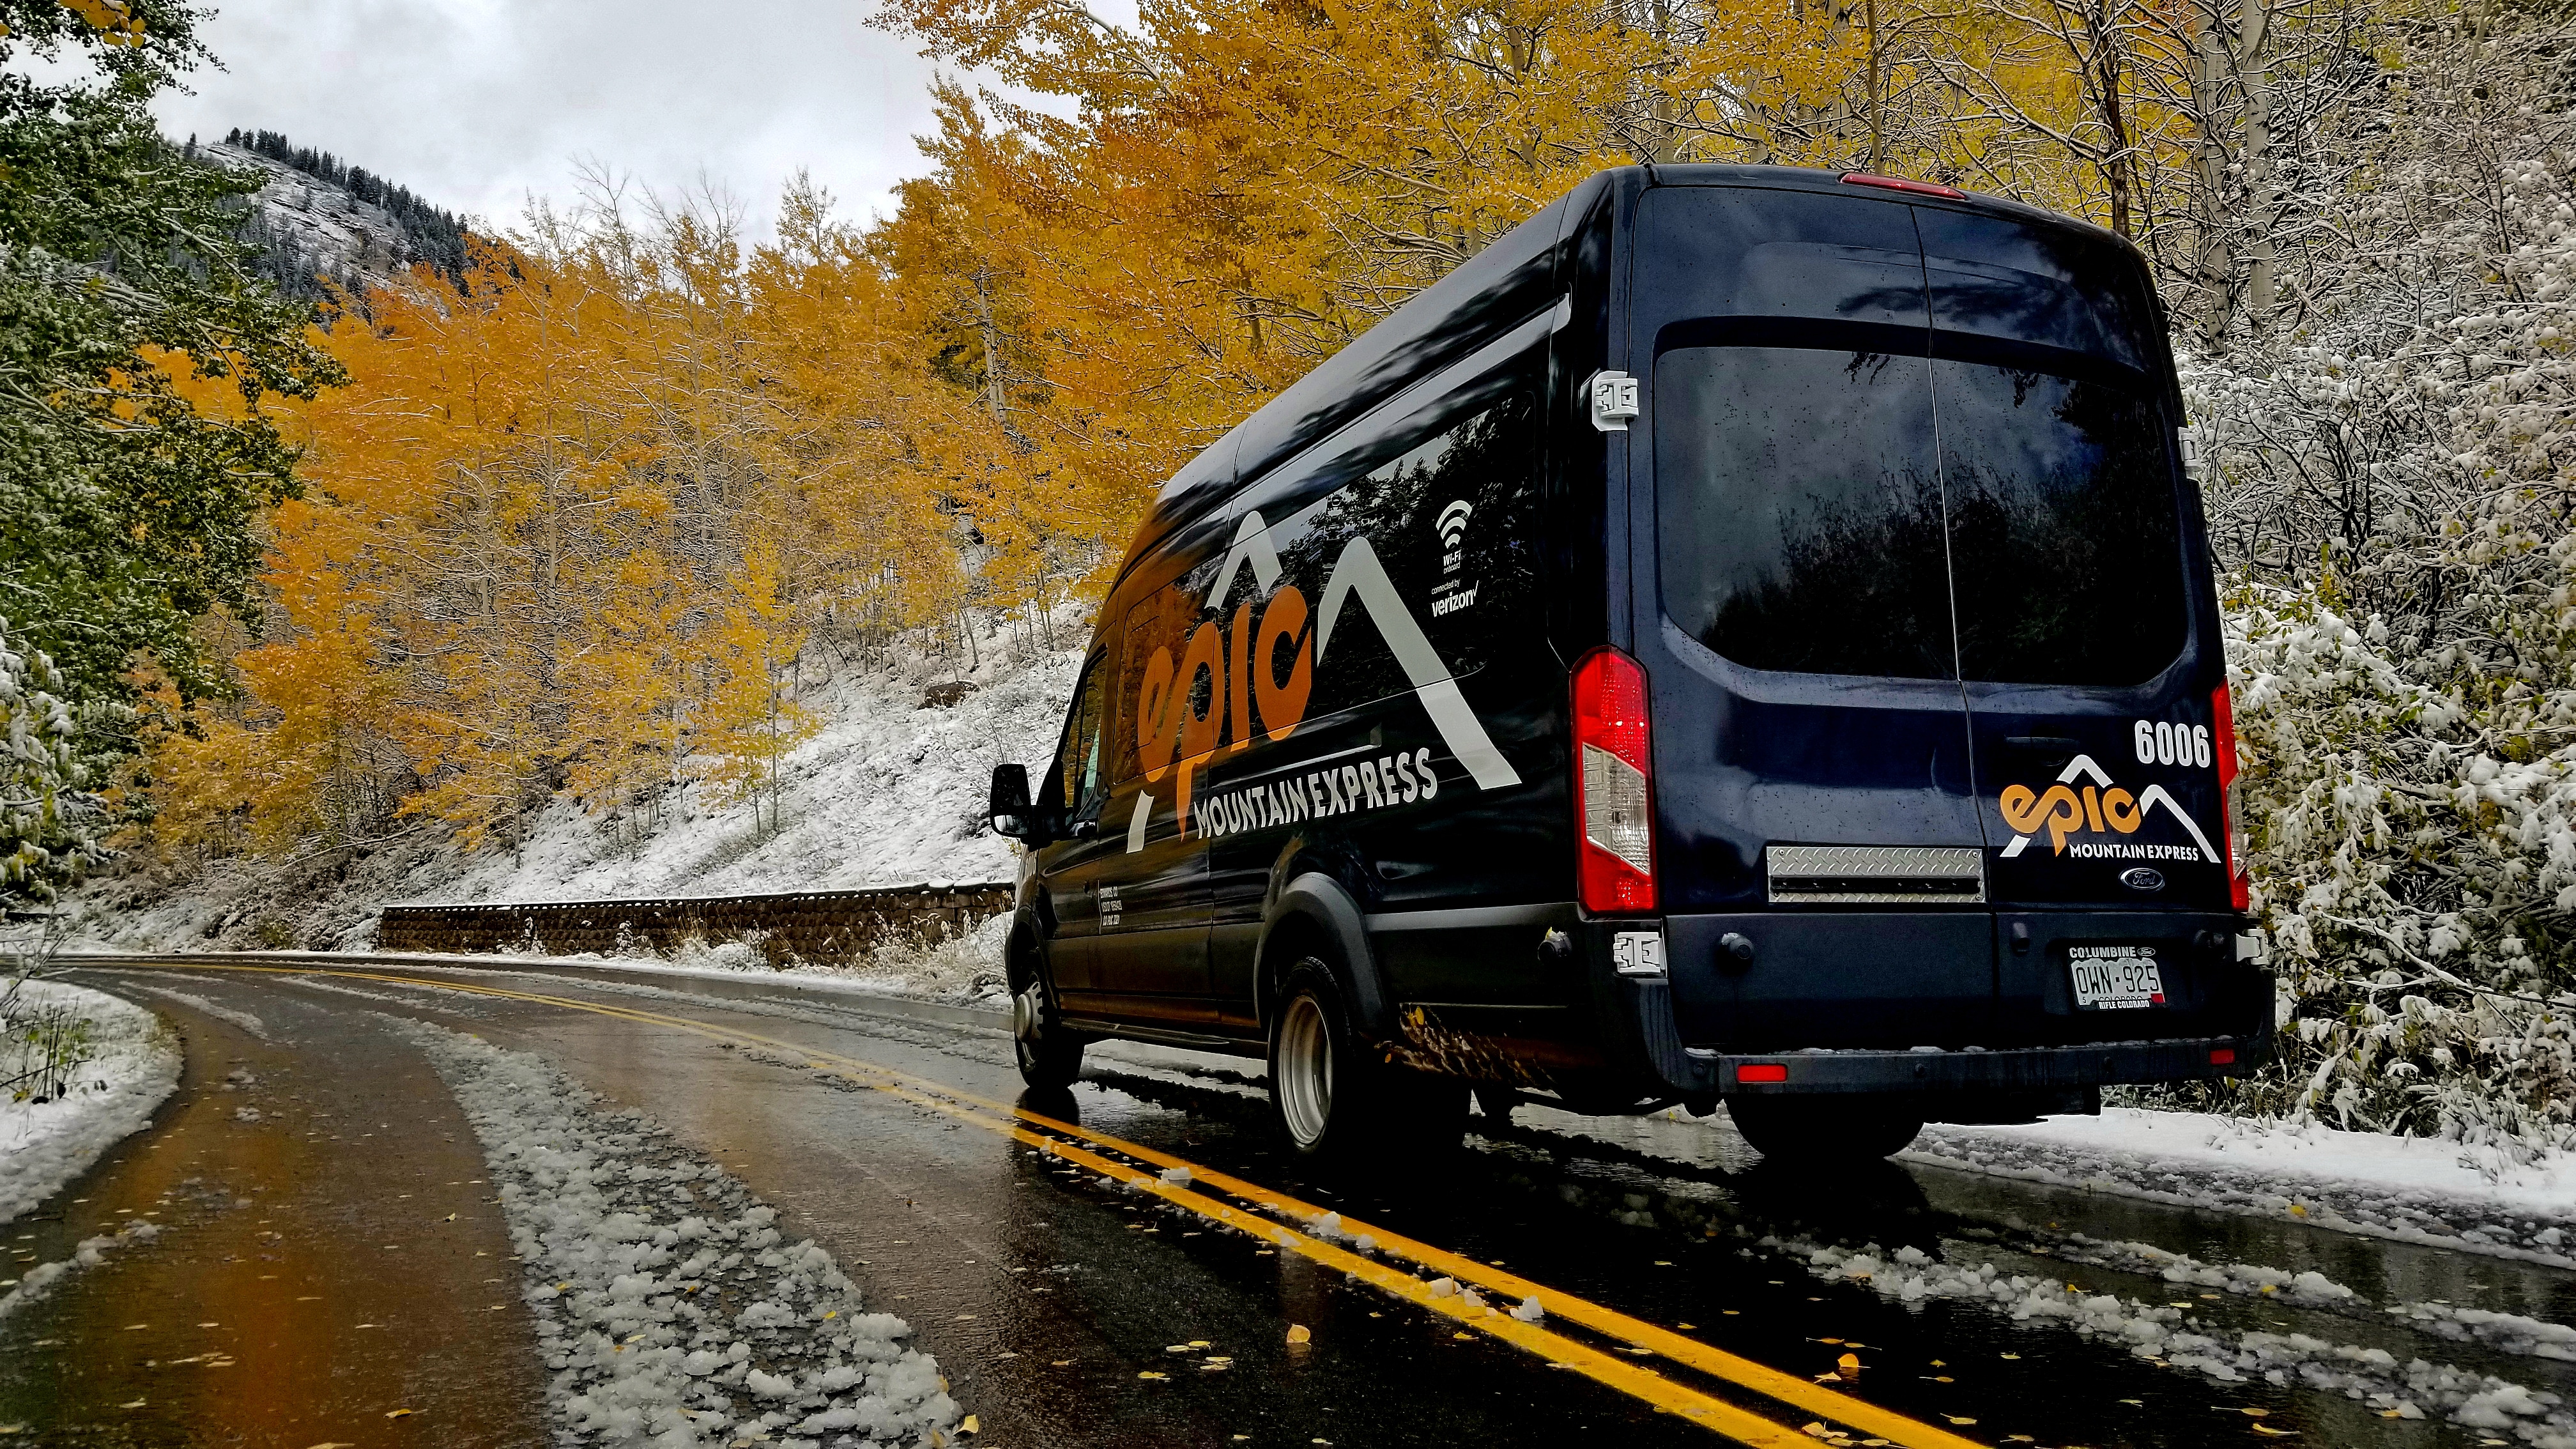 Epic Mountain Express vehicle in the fall